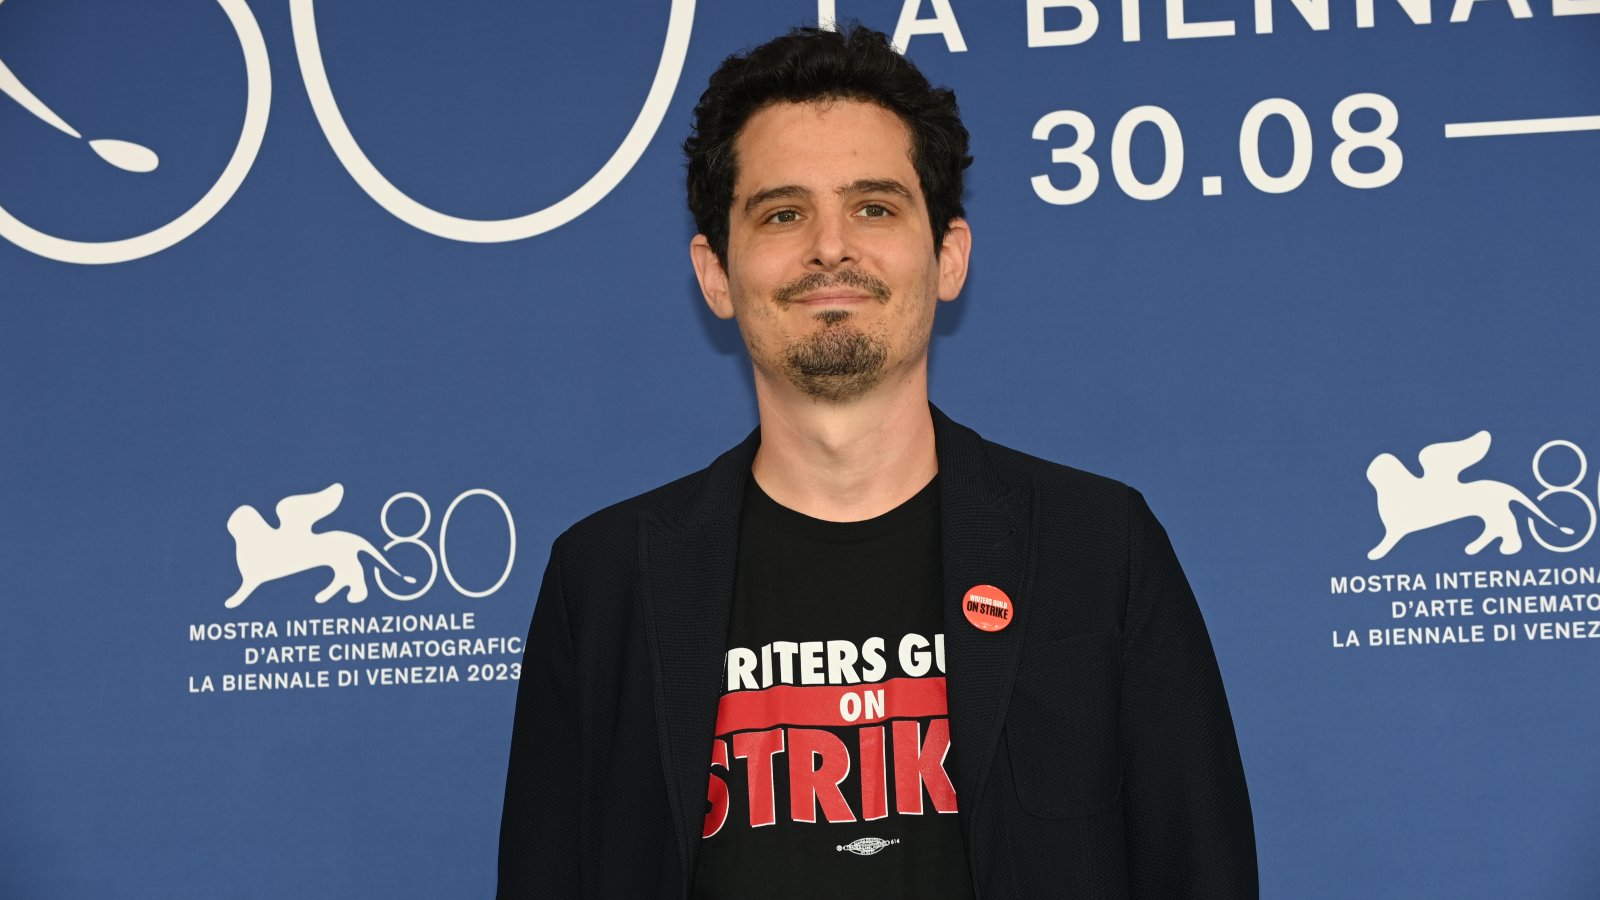 Damien Chazelle in Turin on 24 October: he will receive the Stella della Mole Award and hold a Masterclass